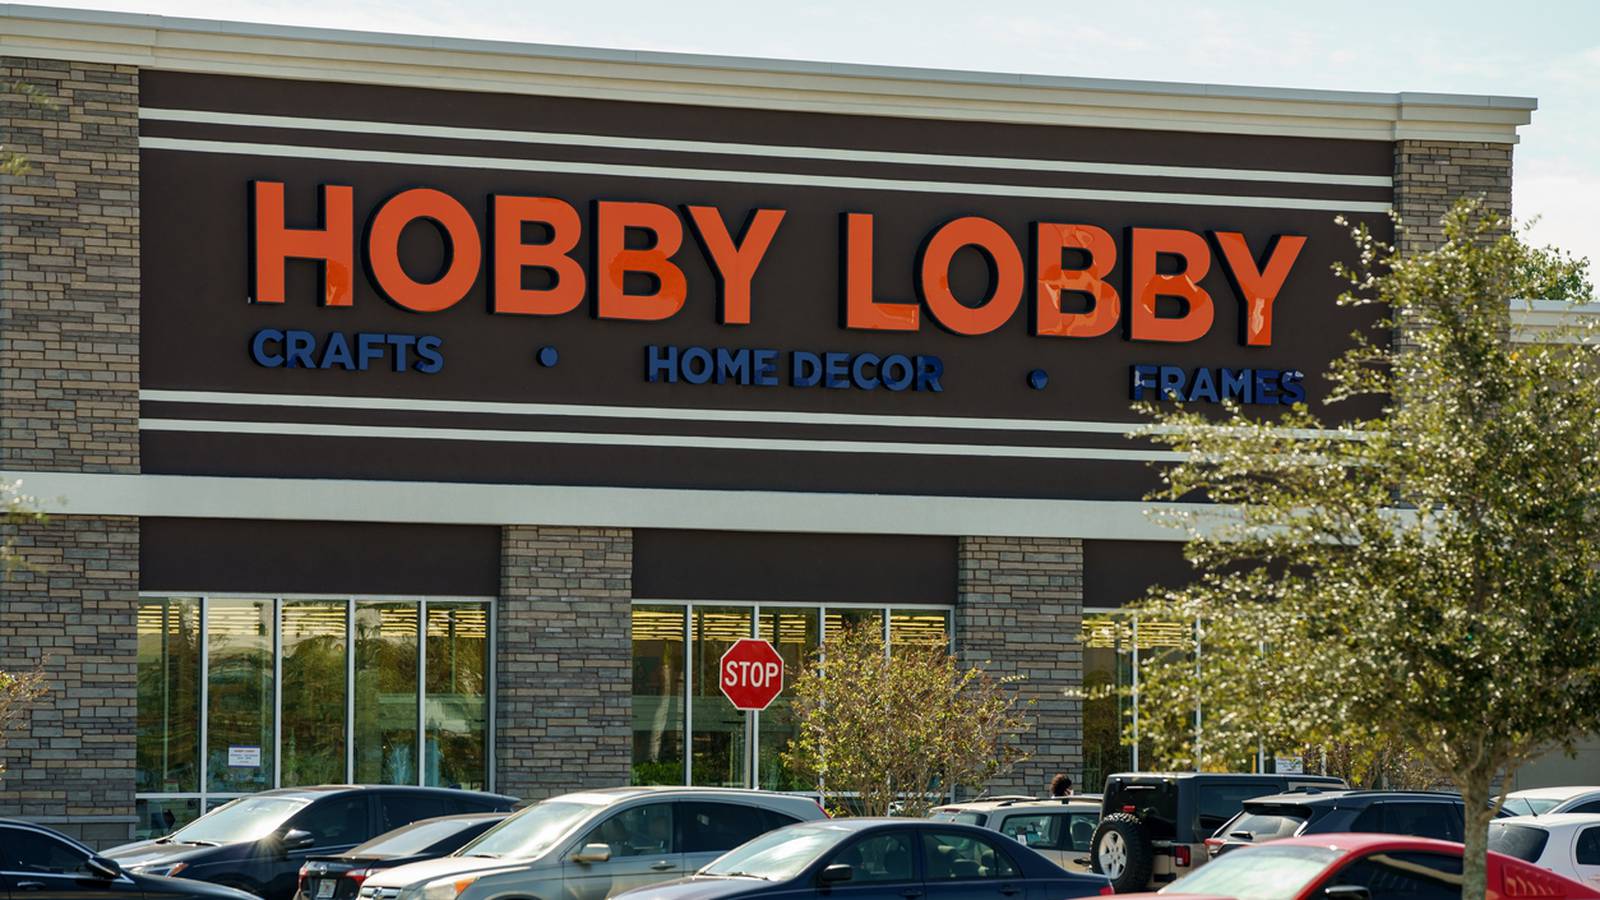 Hobby Lobby to pay 50k to settle service dog lawsuit 102.3 KRMG